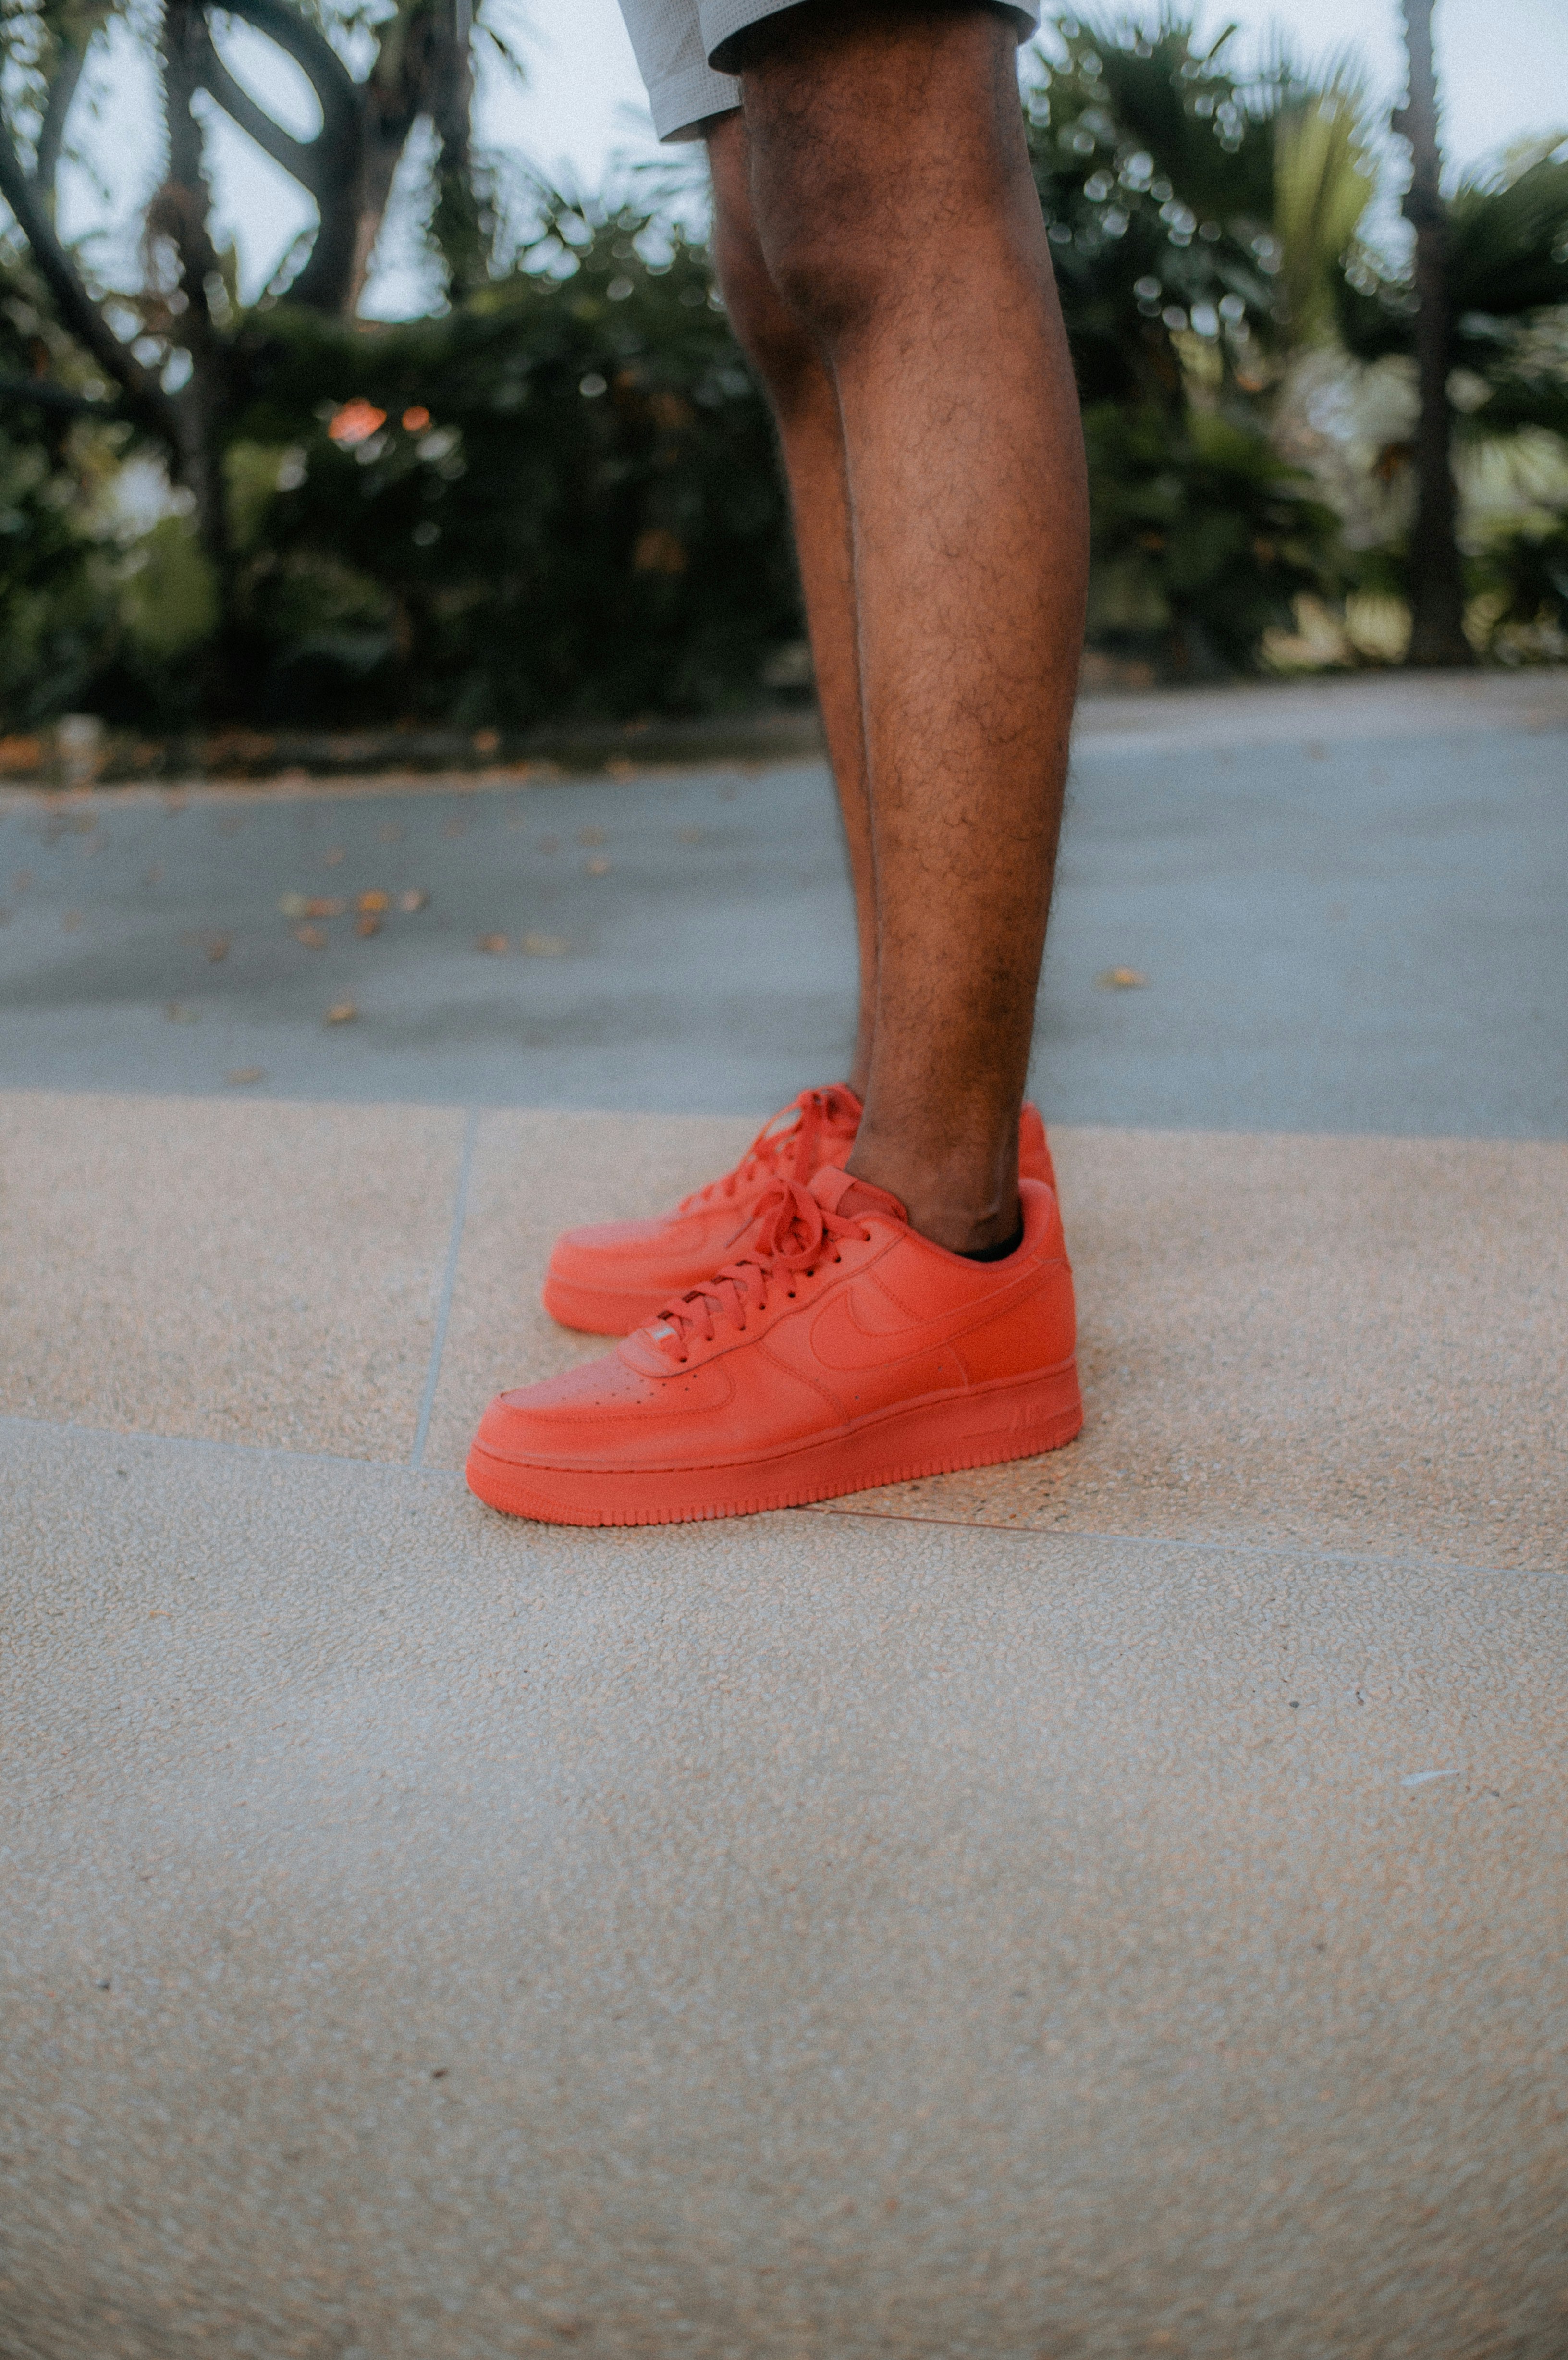 triple red air force 1 on feet